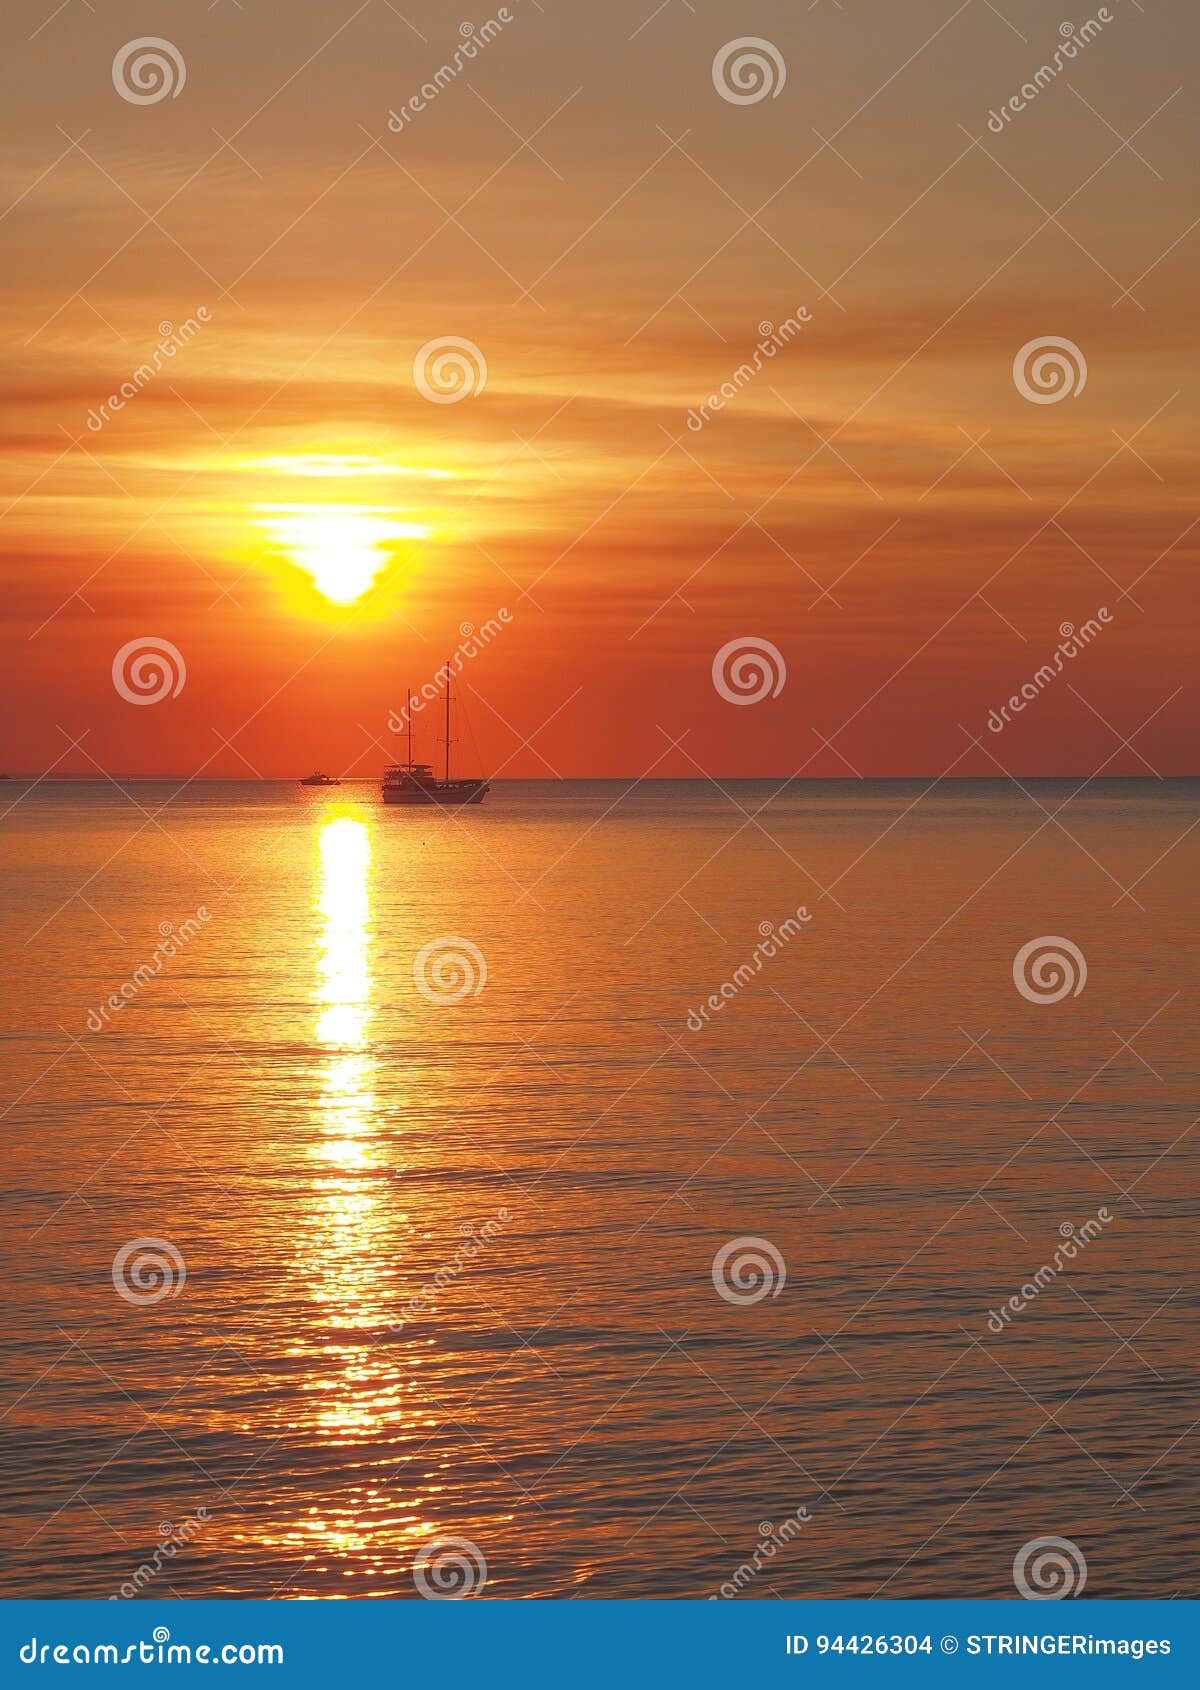 sunset with boat and sun at fannie bay